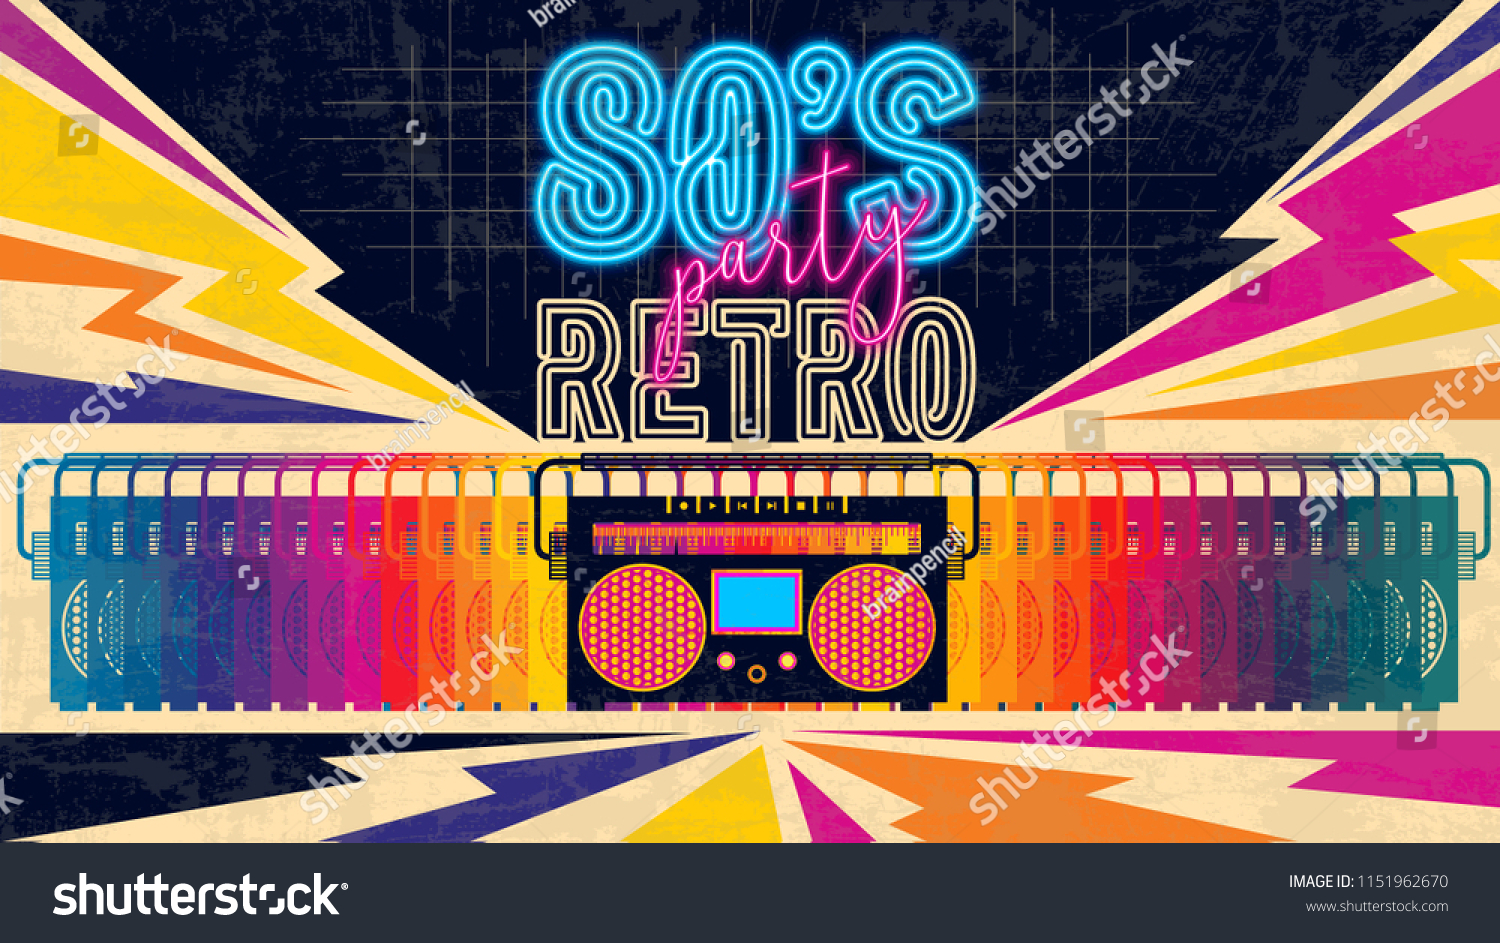 80s, retro music party banner or cover. Old style vector poster. Disco fluorescent neon style for eighties party. 1980 radio cassette player. Fashion background easy editable template for event. #1151962670